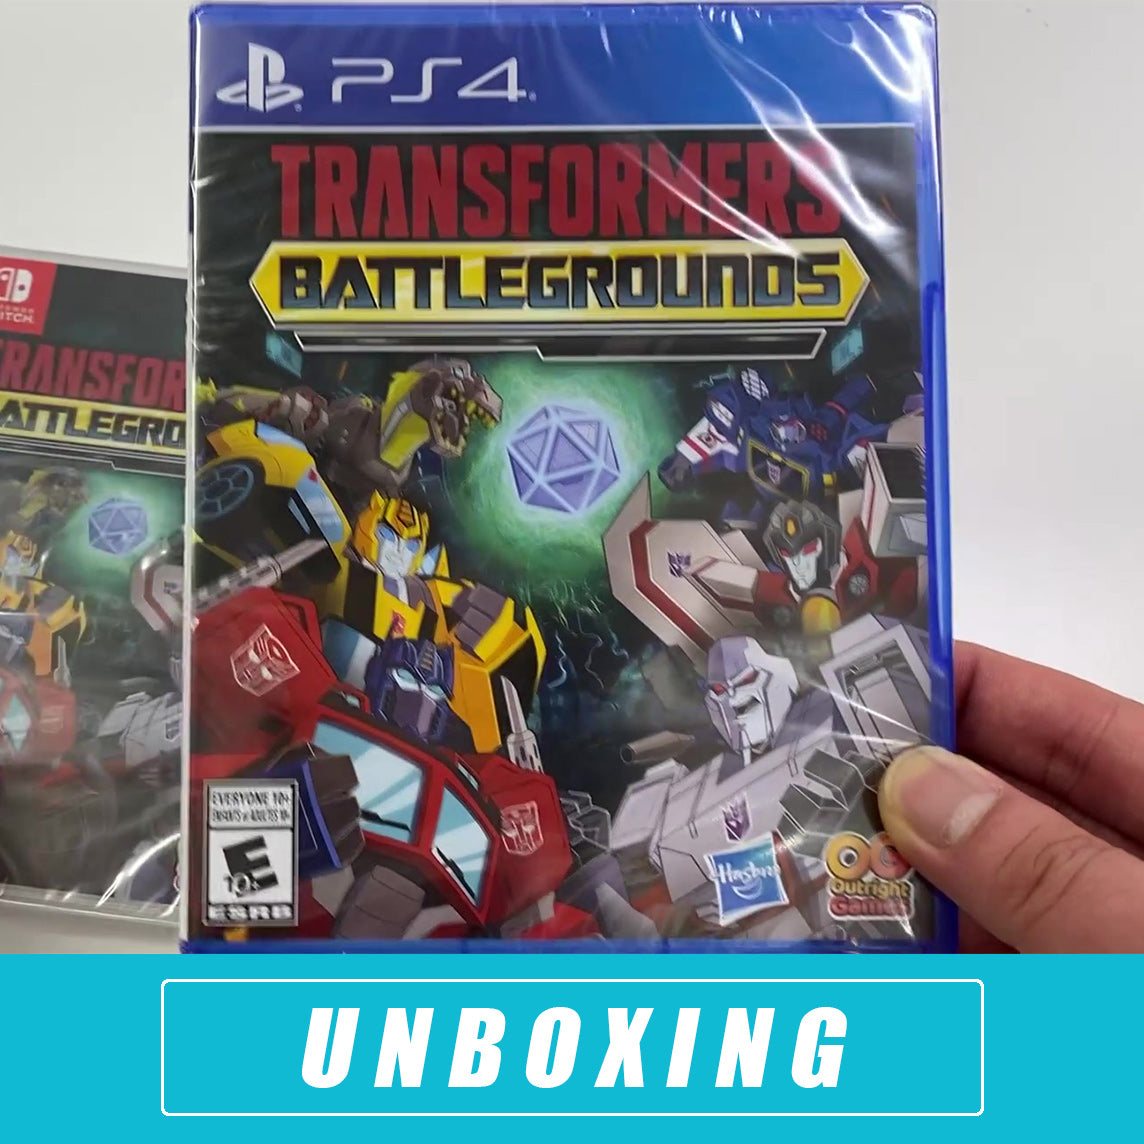 Transformers: Battlegrounds - (PS4) PlayStation 4 [UNBOXING] Video Games Outright Games   